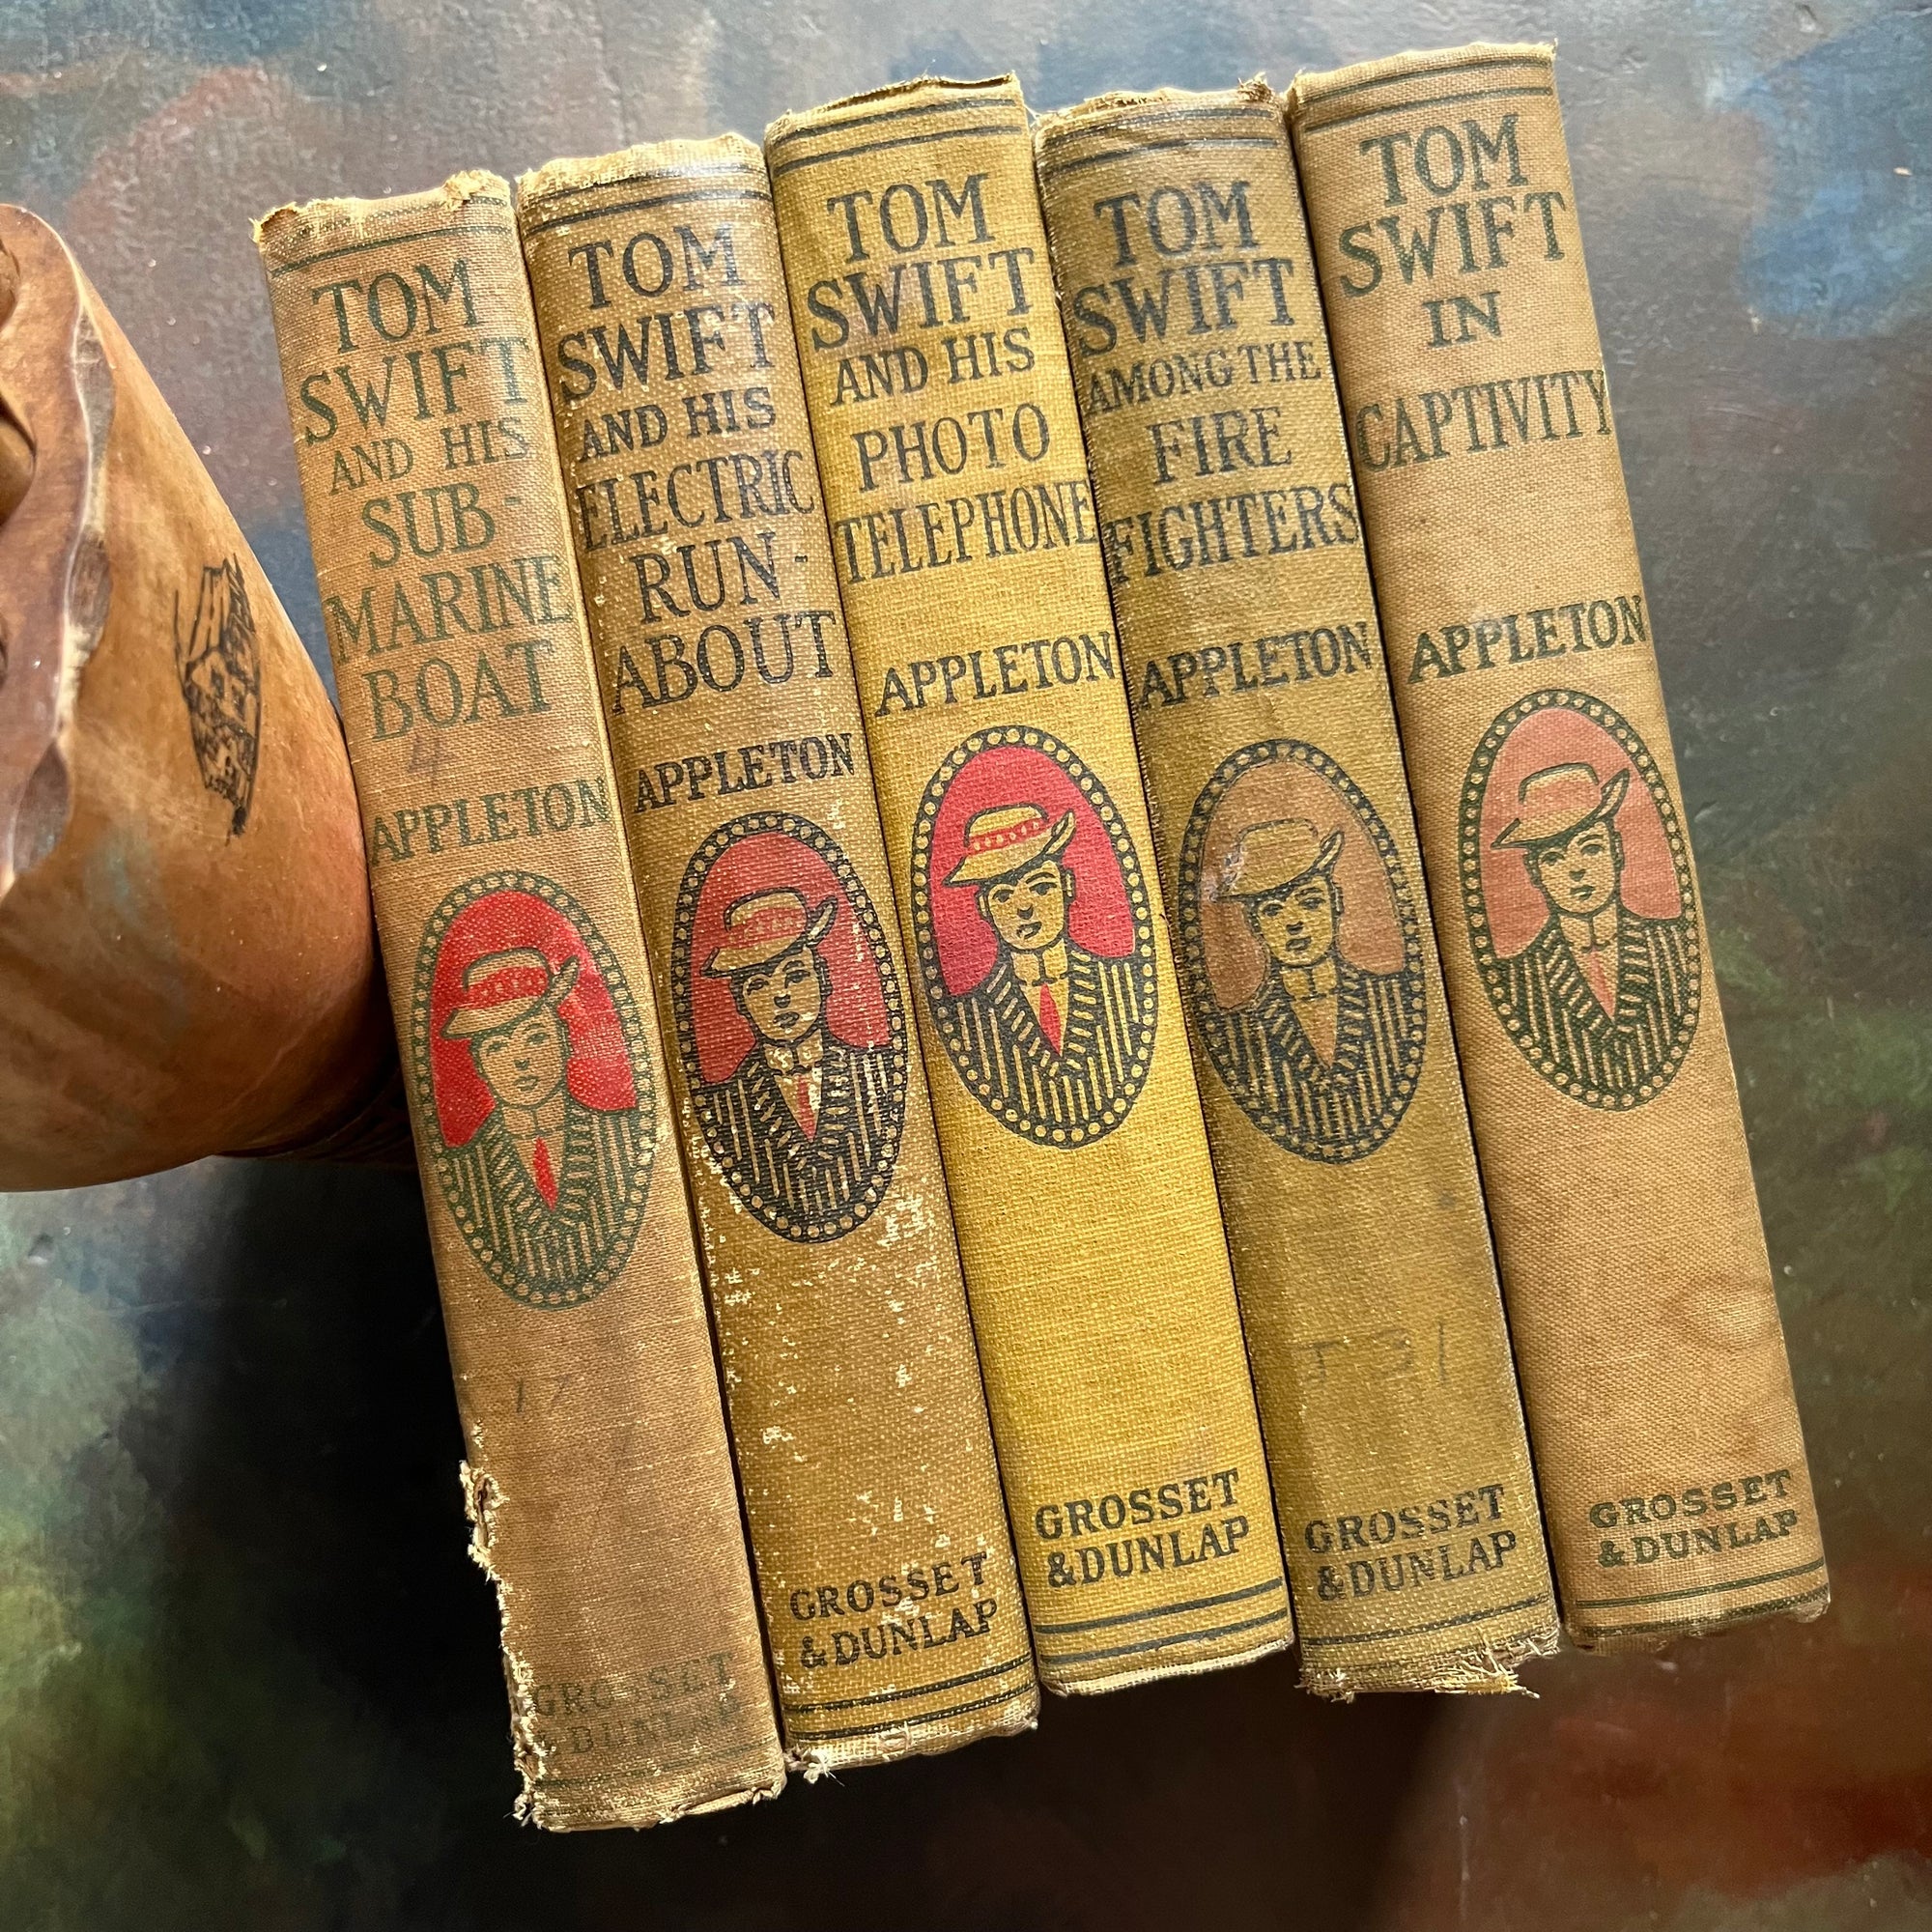 Set of 5 Tom Swift Antique Books written by Victor Appleton-adventure books for boys-view of the spines